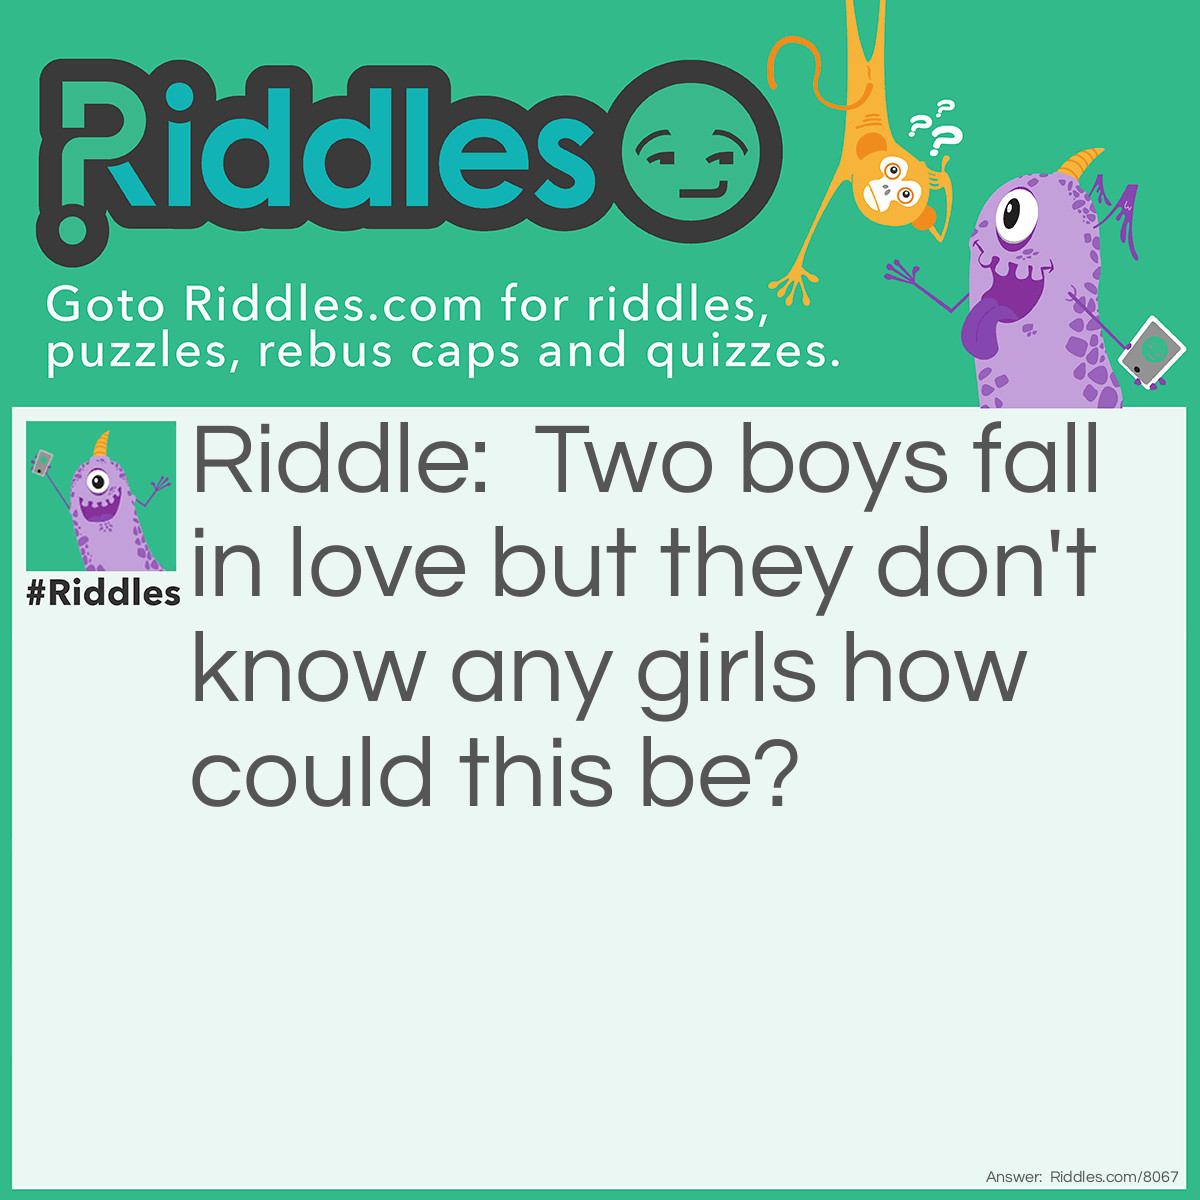 Riddle: Two boys fall in love but they don't know any girls how could this be? Answer: They love each other :)